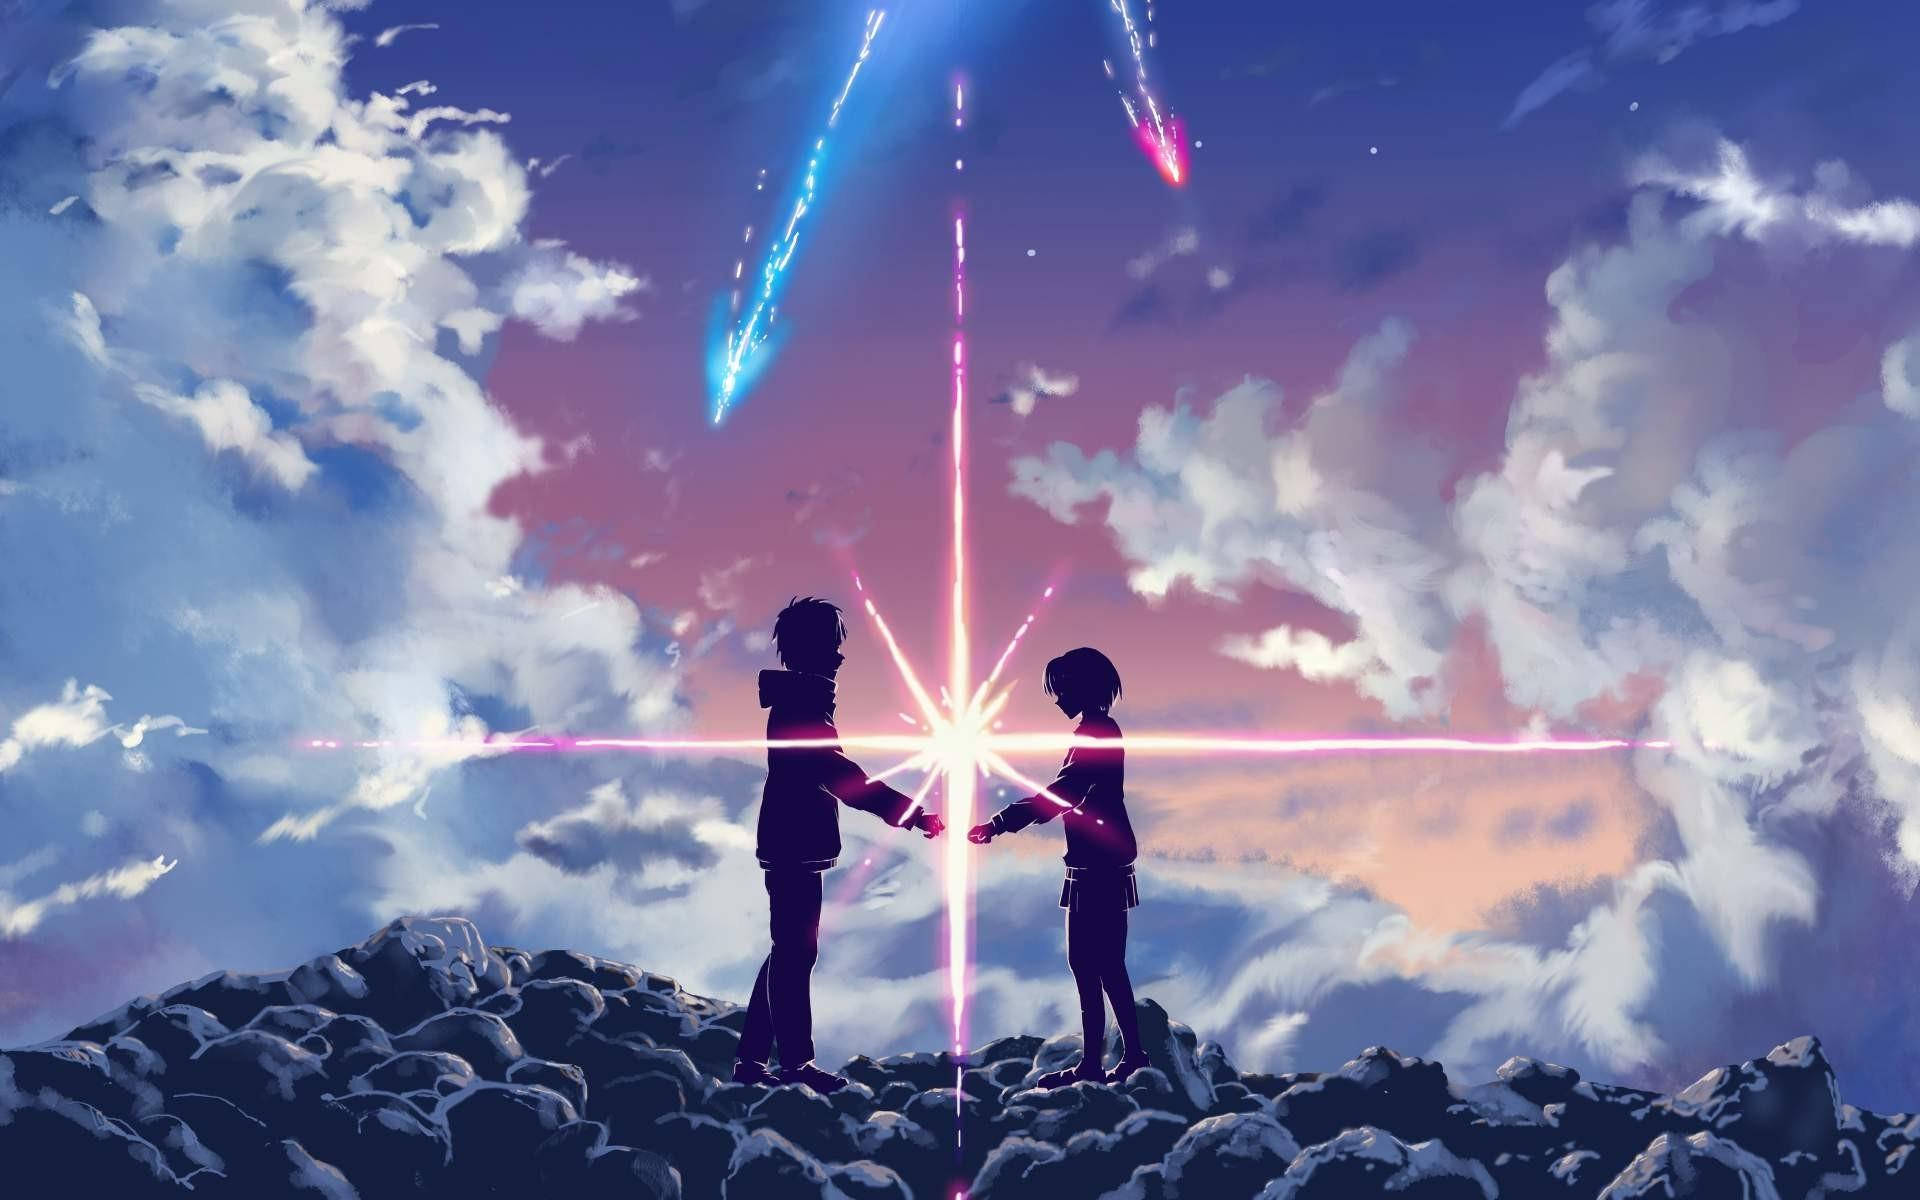 Your Name Aesthetic Anime Couple